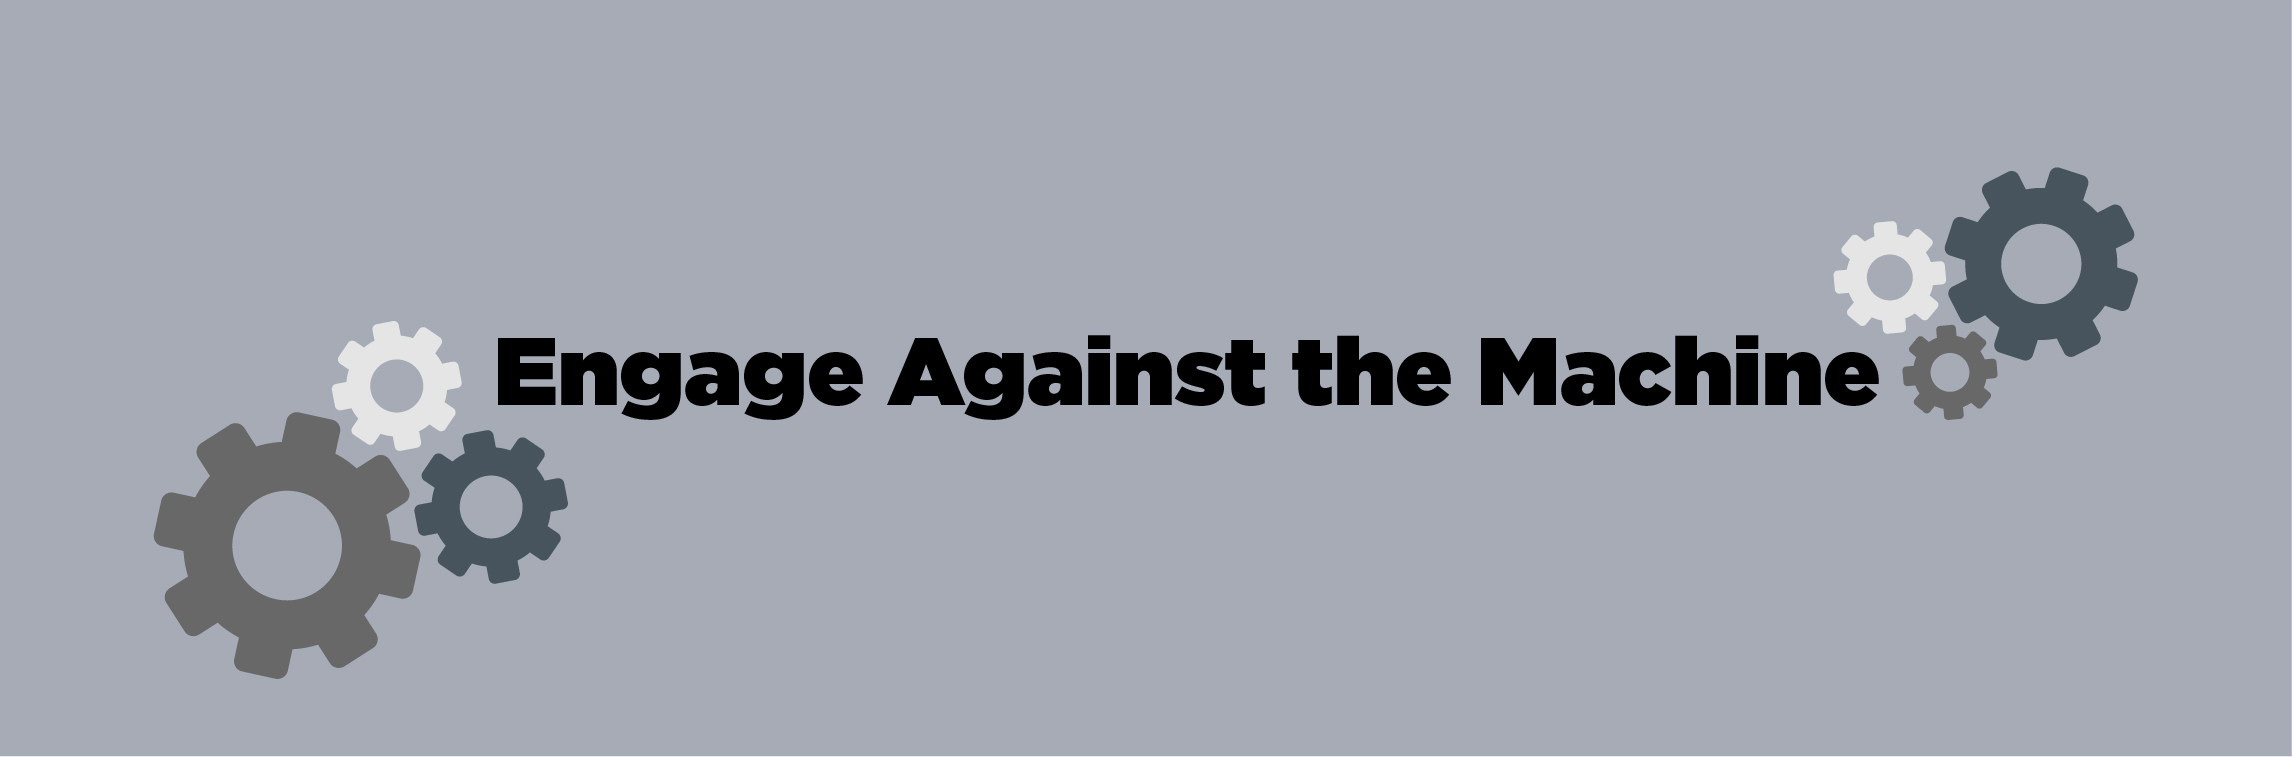 Engage Against the Machine banner image